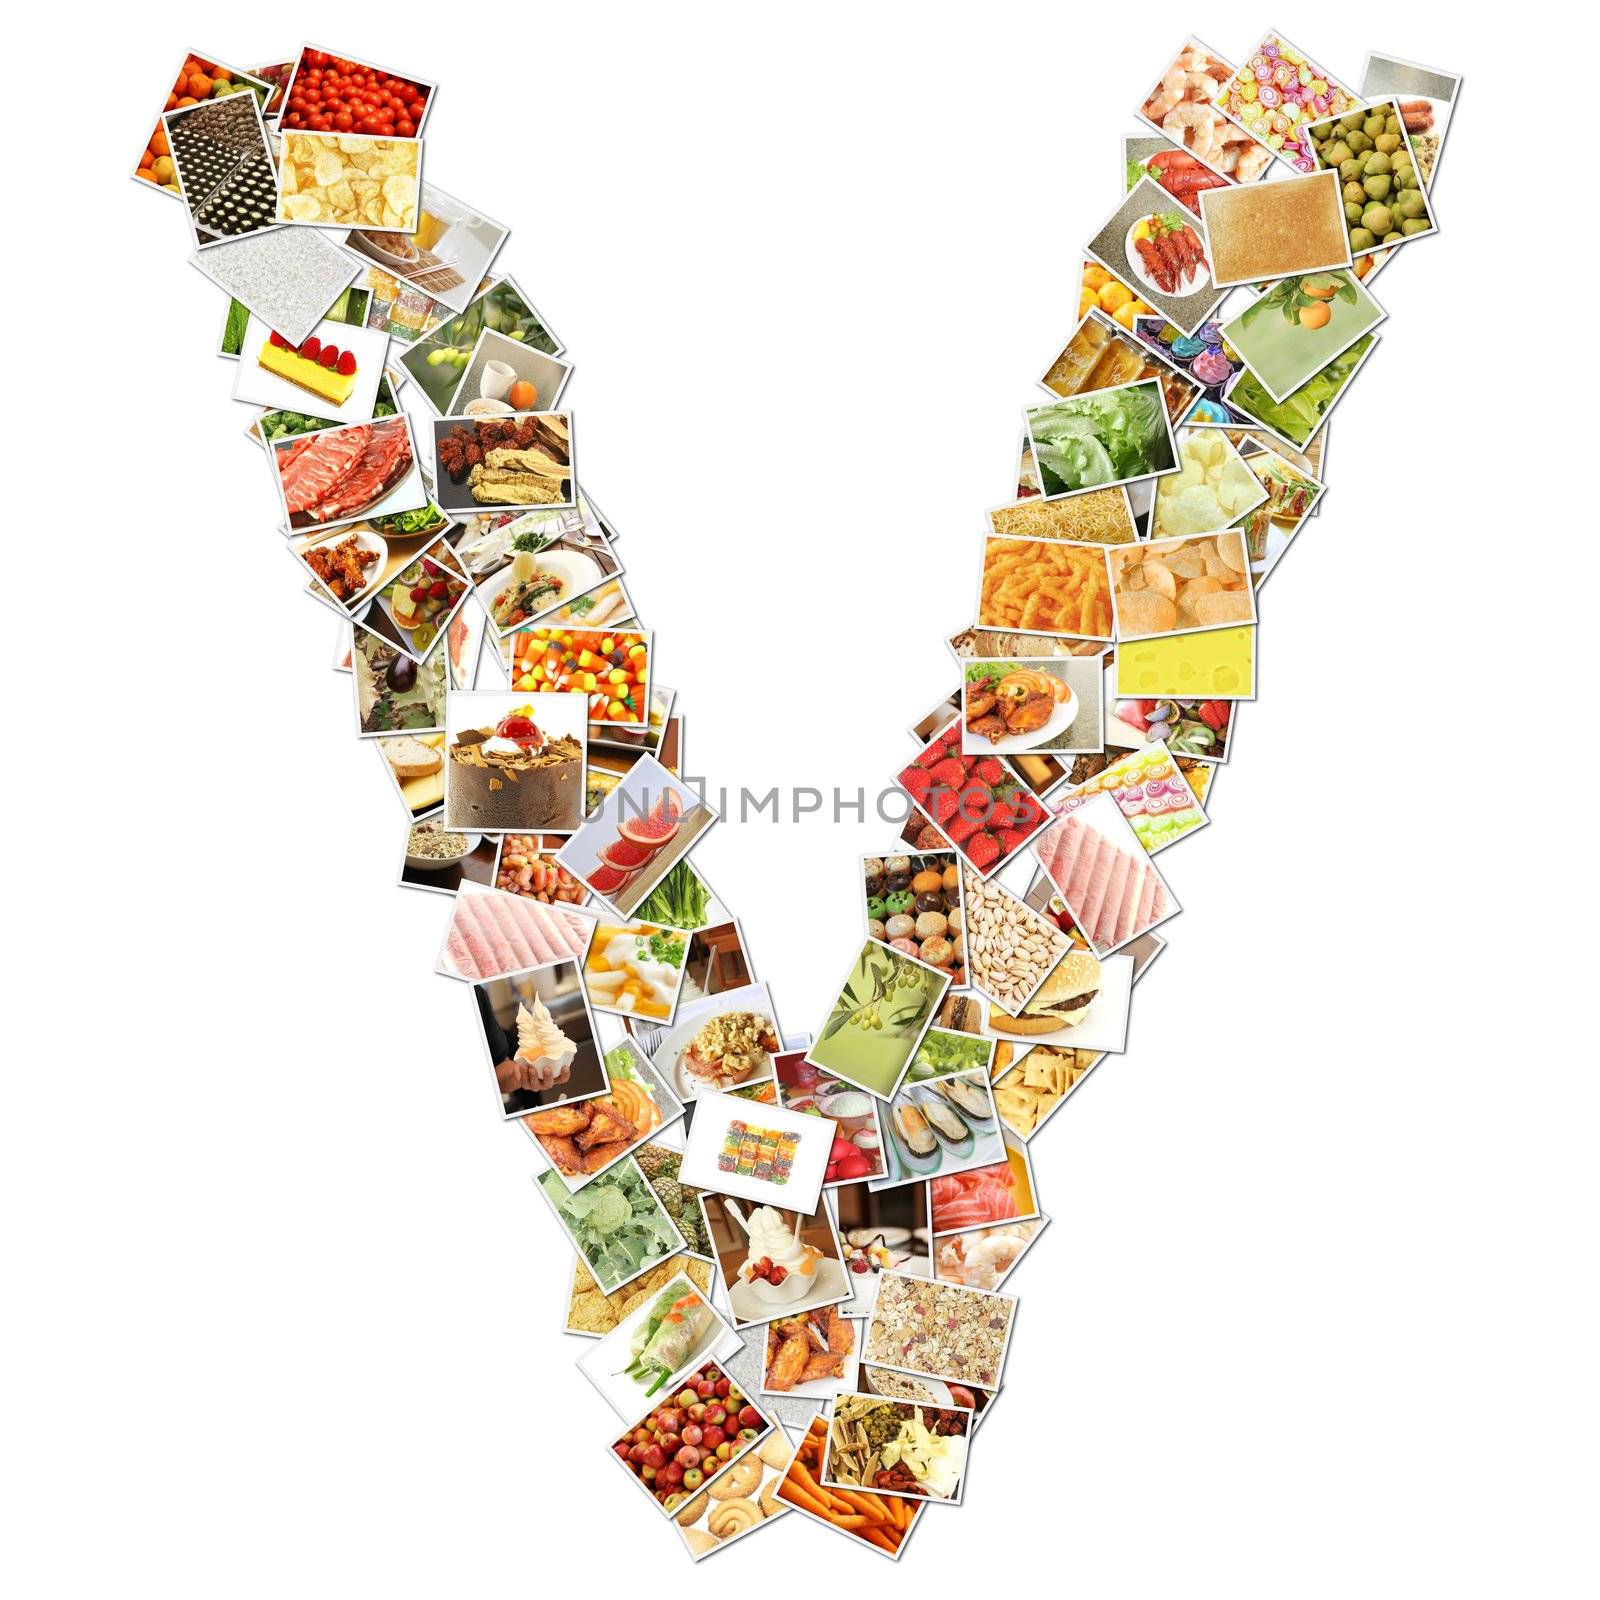 Letter V with Food Collage Concept Art